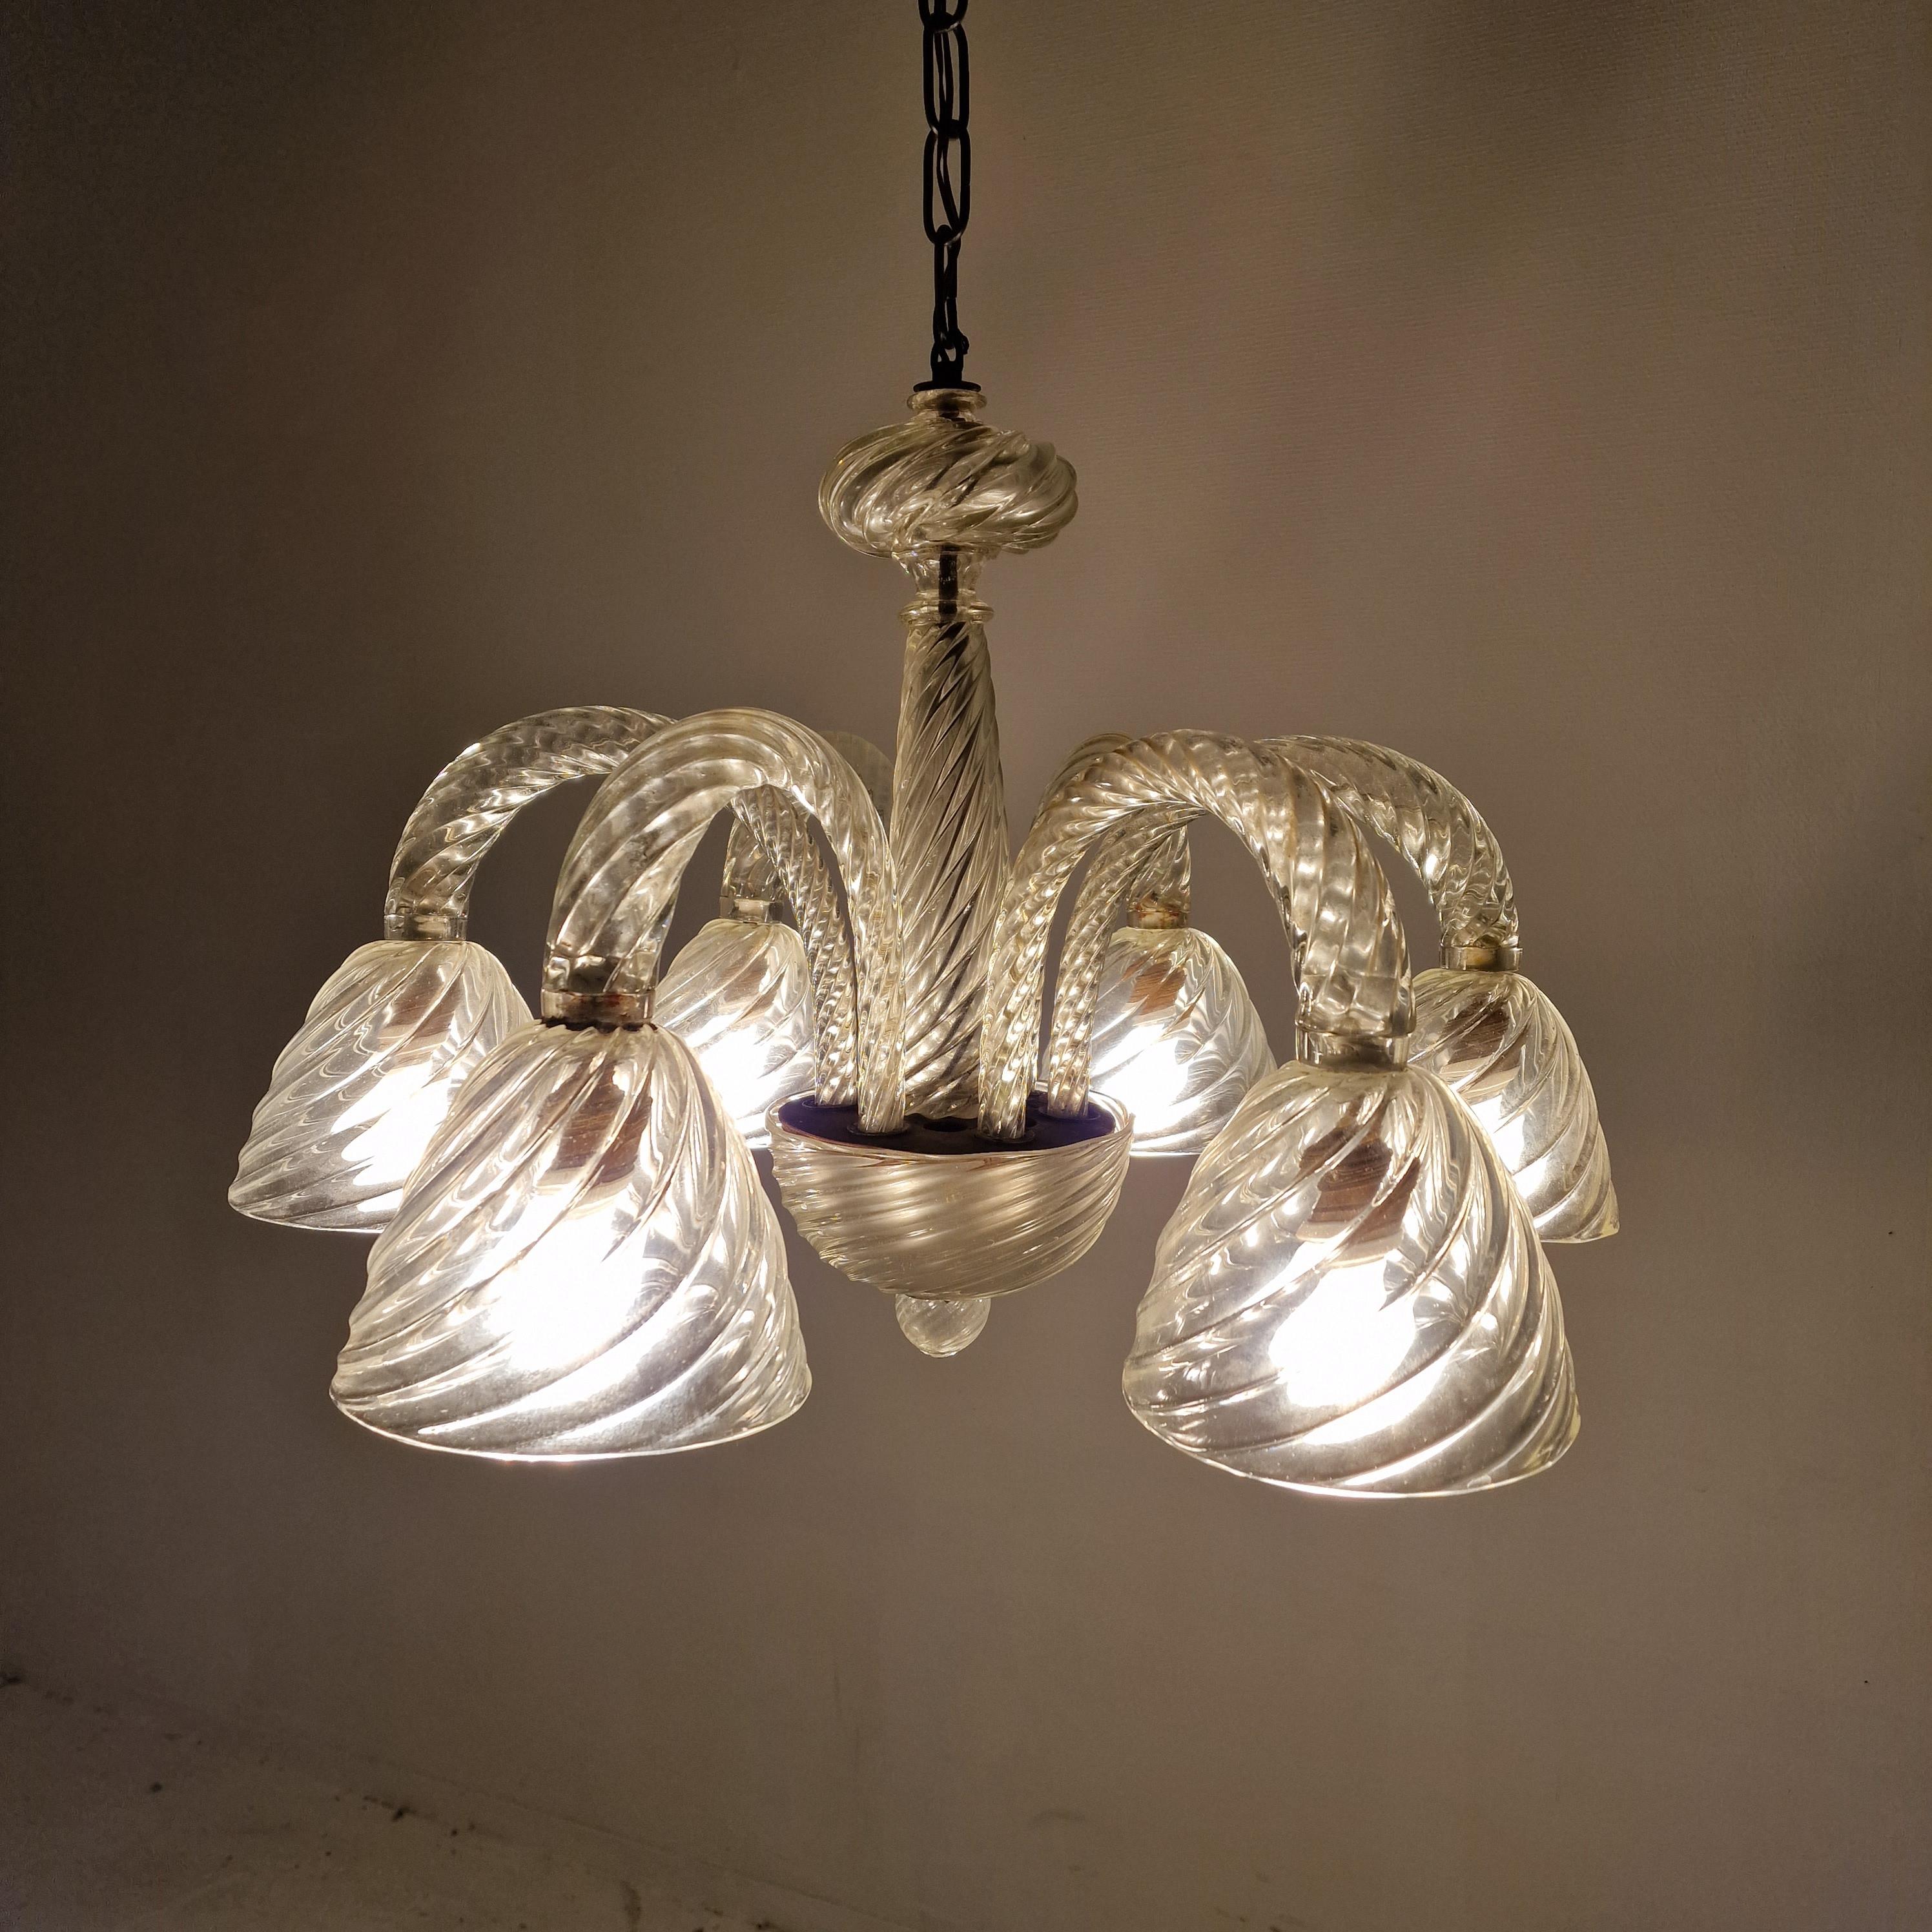 Barovier & Toso Murano Glass Chandelier, Italy 1950's In Good Condition For Sale In Oud Beijerland, NL